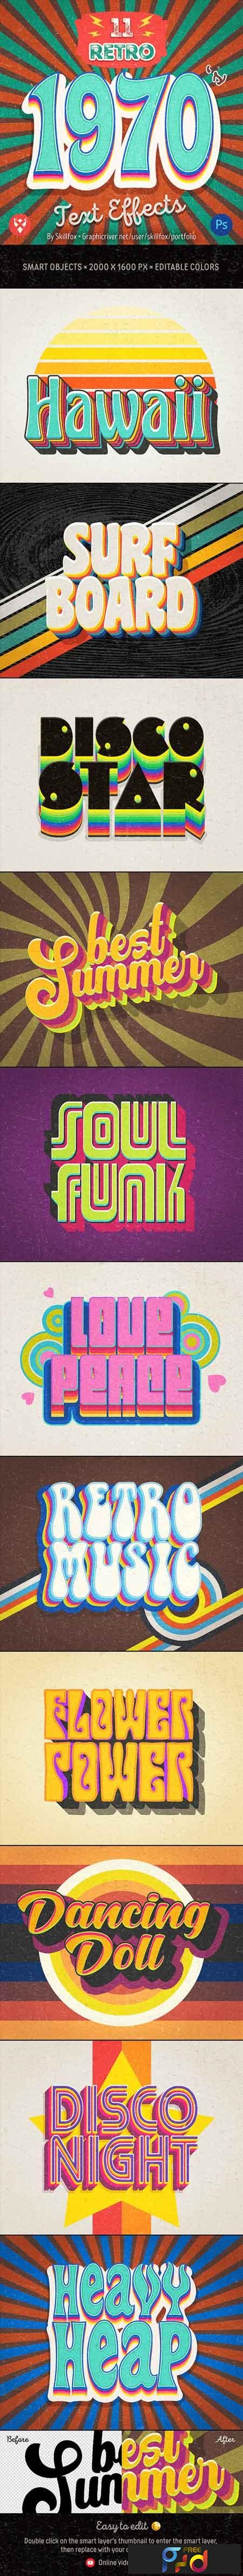 11 70's Retro Text Effects 23203116 1